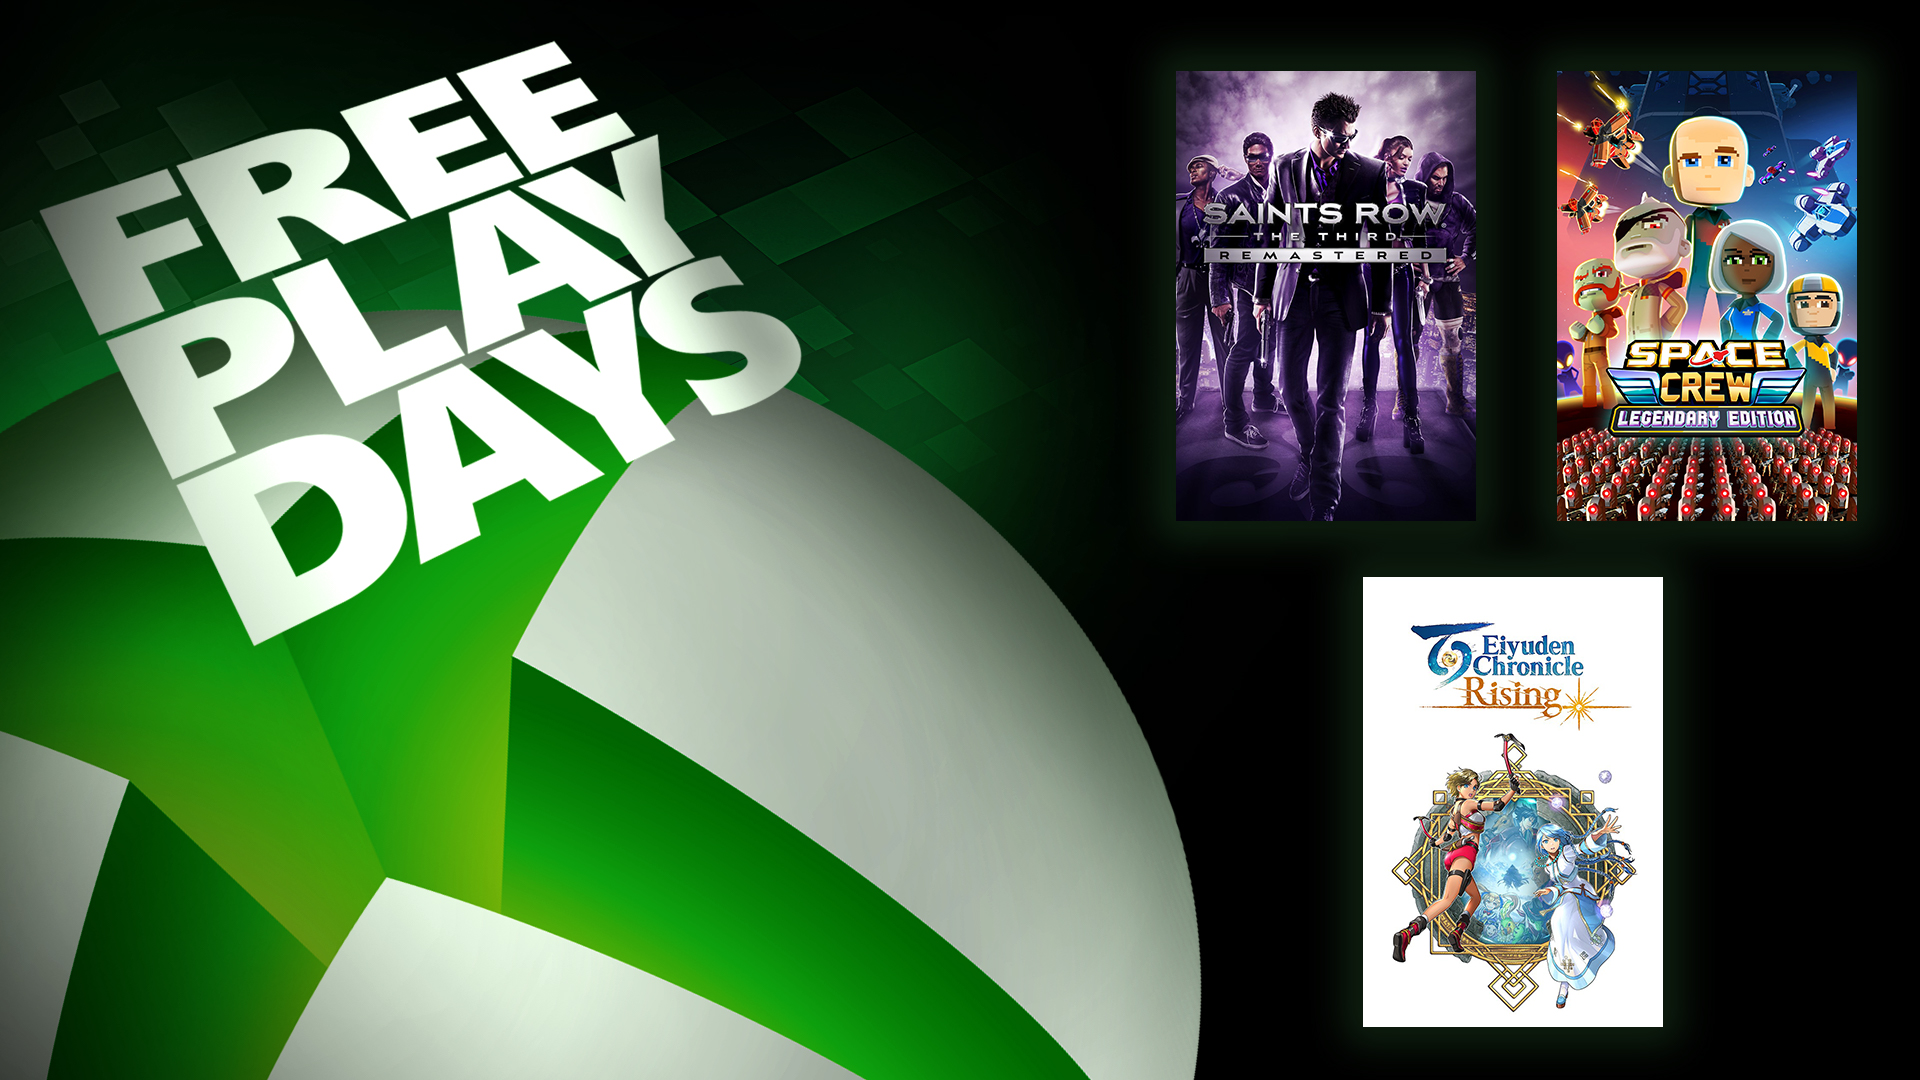 Free Play Days - August 11